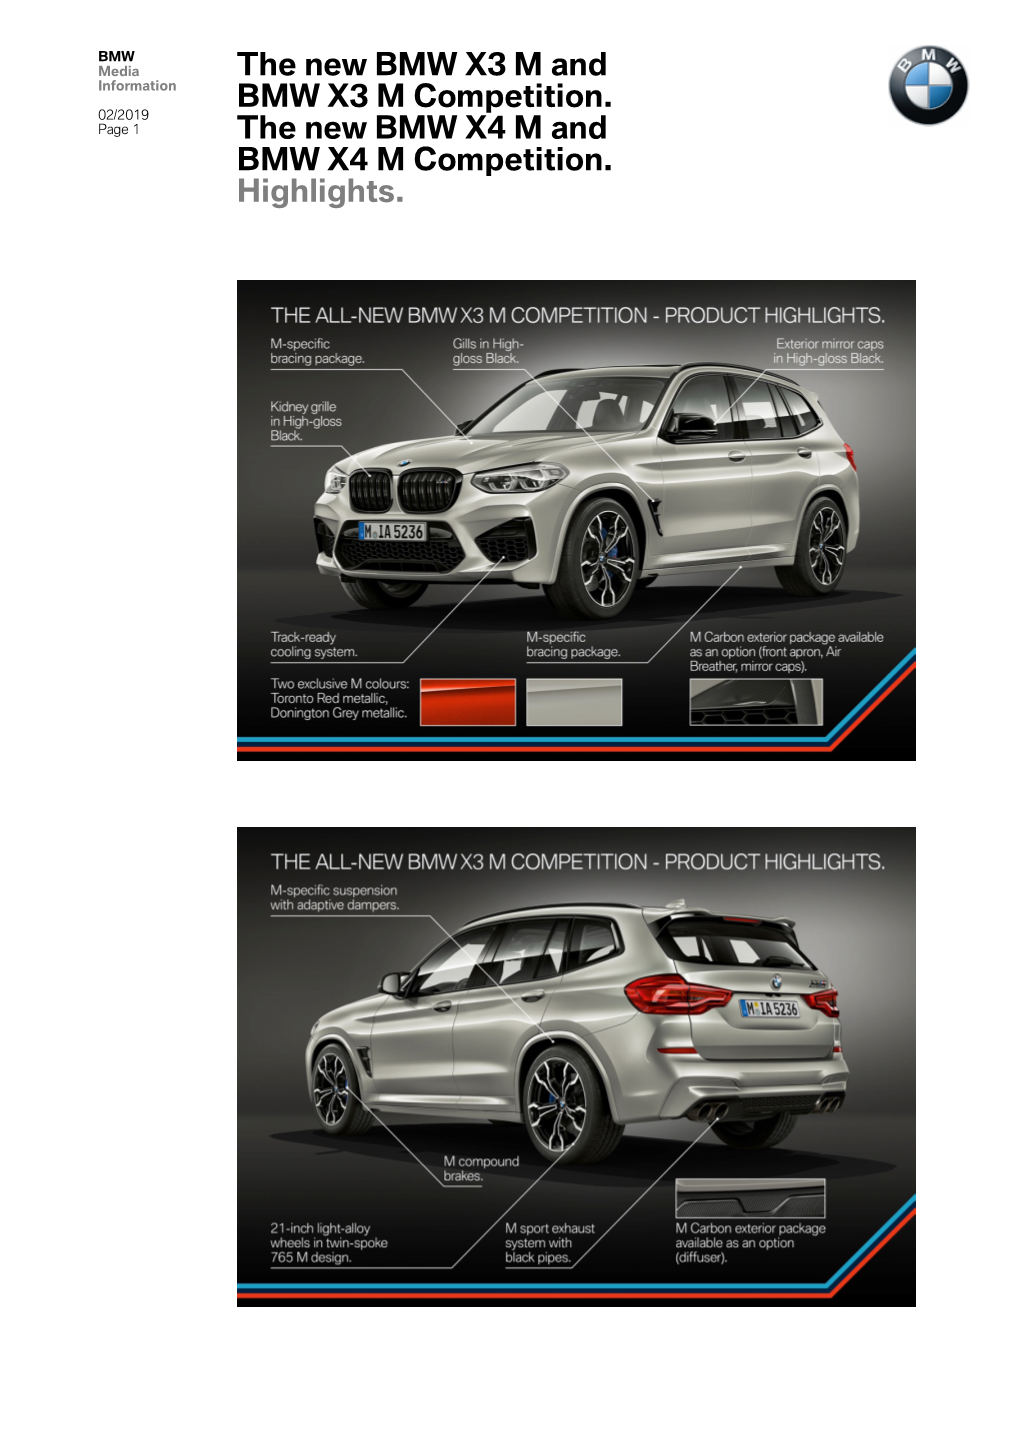 The New BMW X3 M and BMW X3 M Competition. the New BMW X4 M